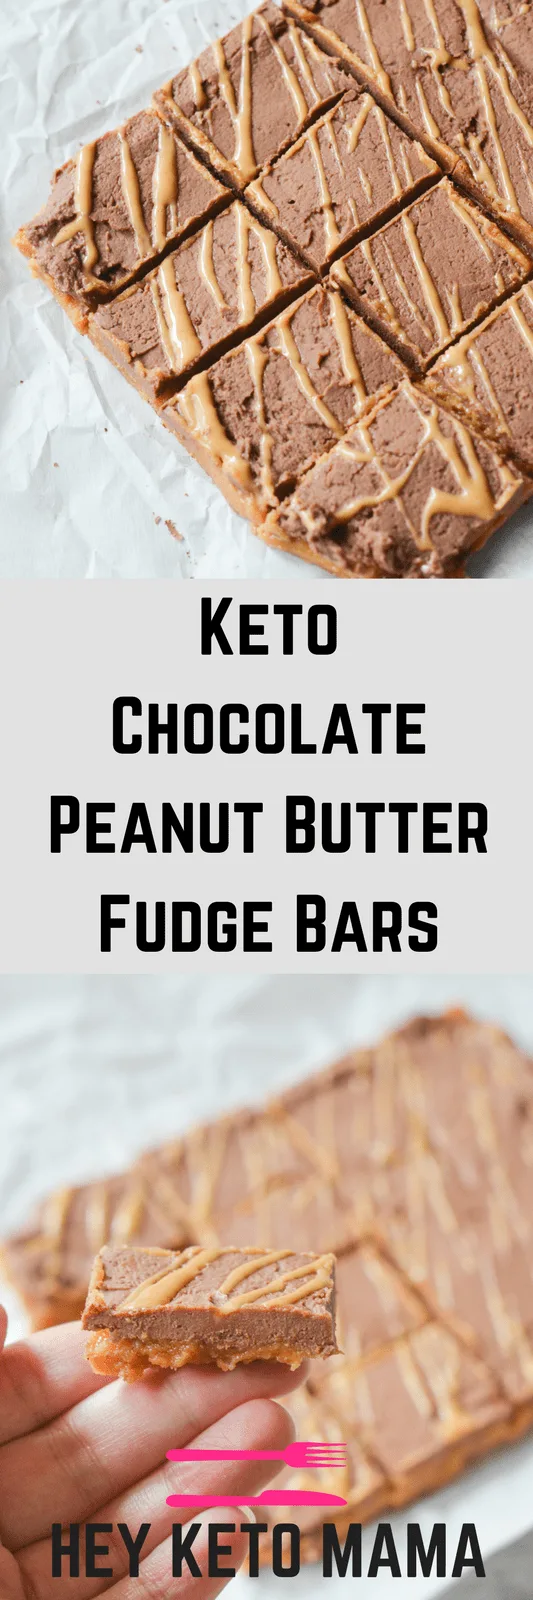 These Keto Chocolate Peanut Butter Fudge Bars are an easy to make indulgence that will satisfy your sweet tooth in a guilt free way.  | heyketomama.com